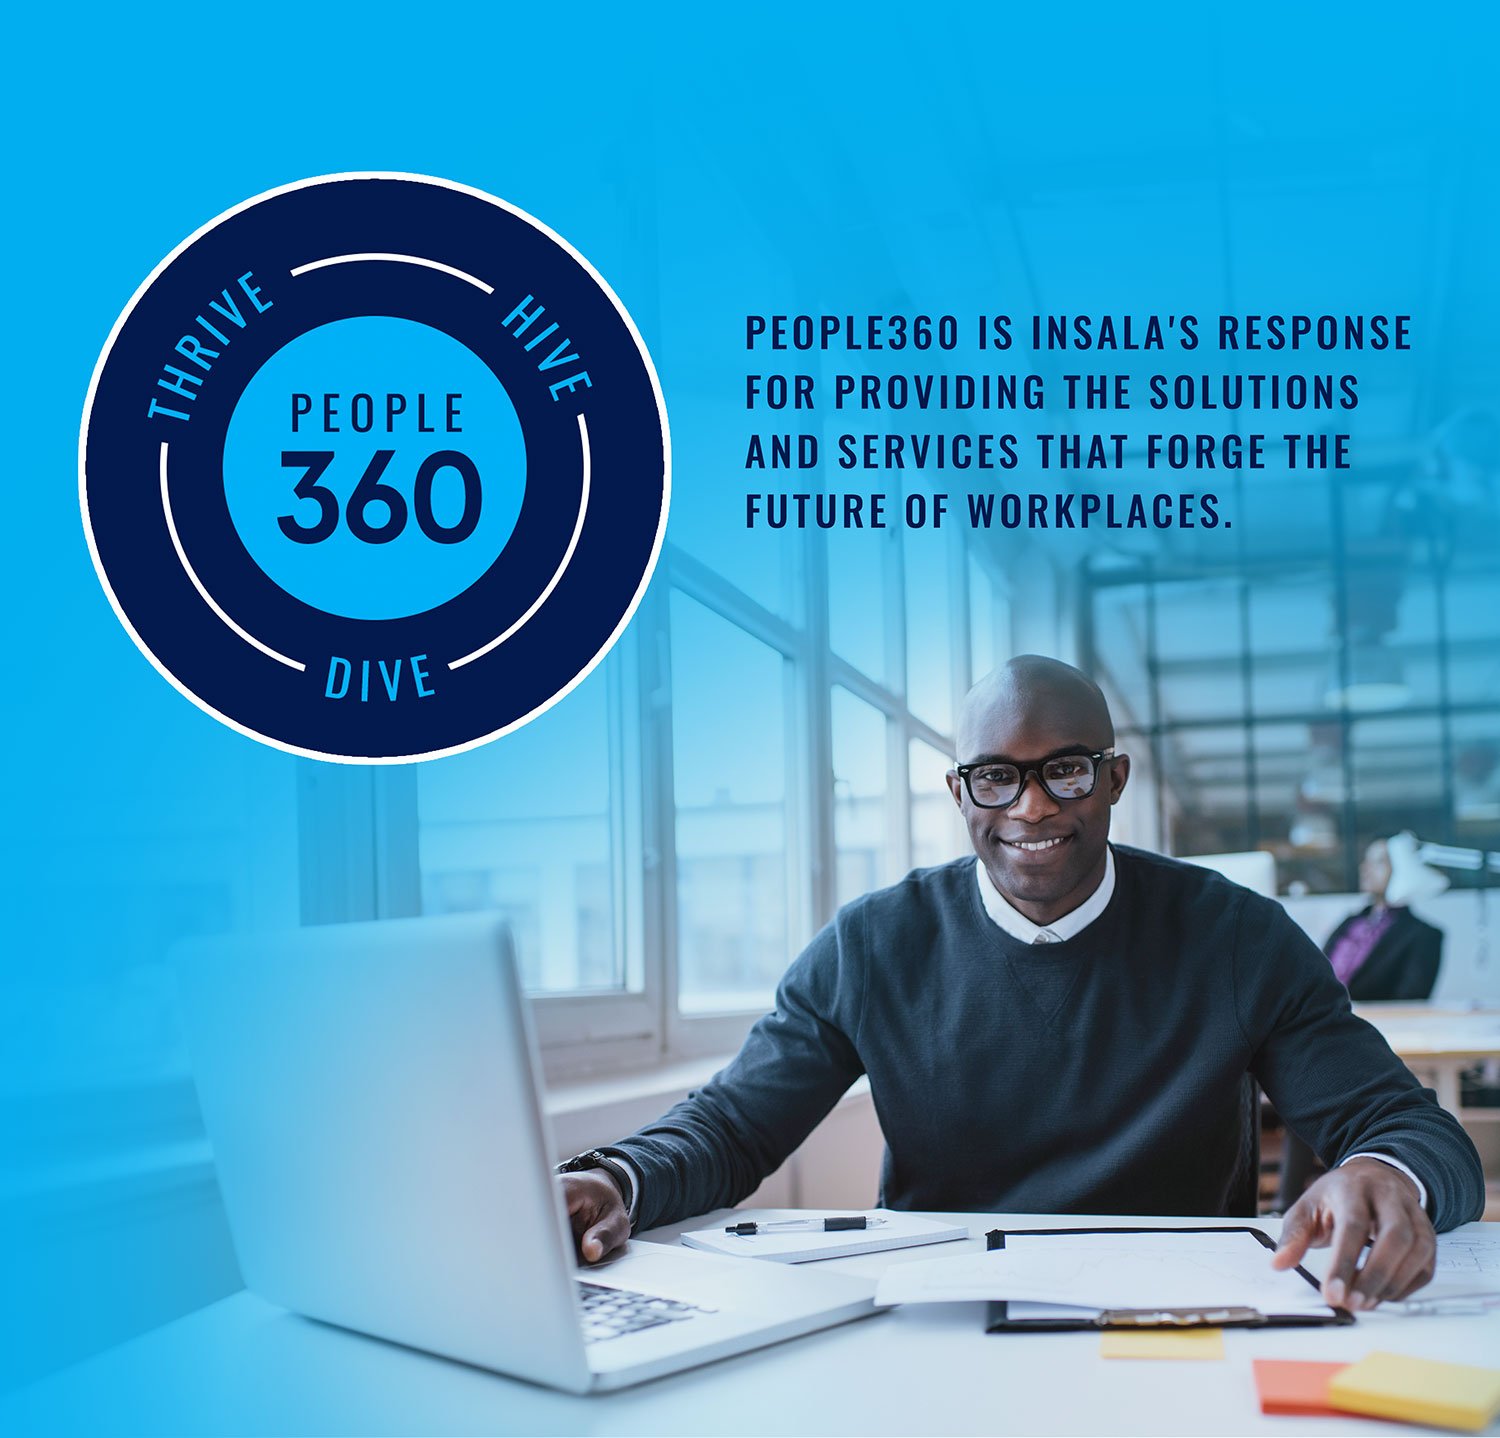 People360 is Insala's response for providing the solutions and services for forging the future of workplaces.